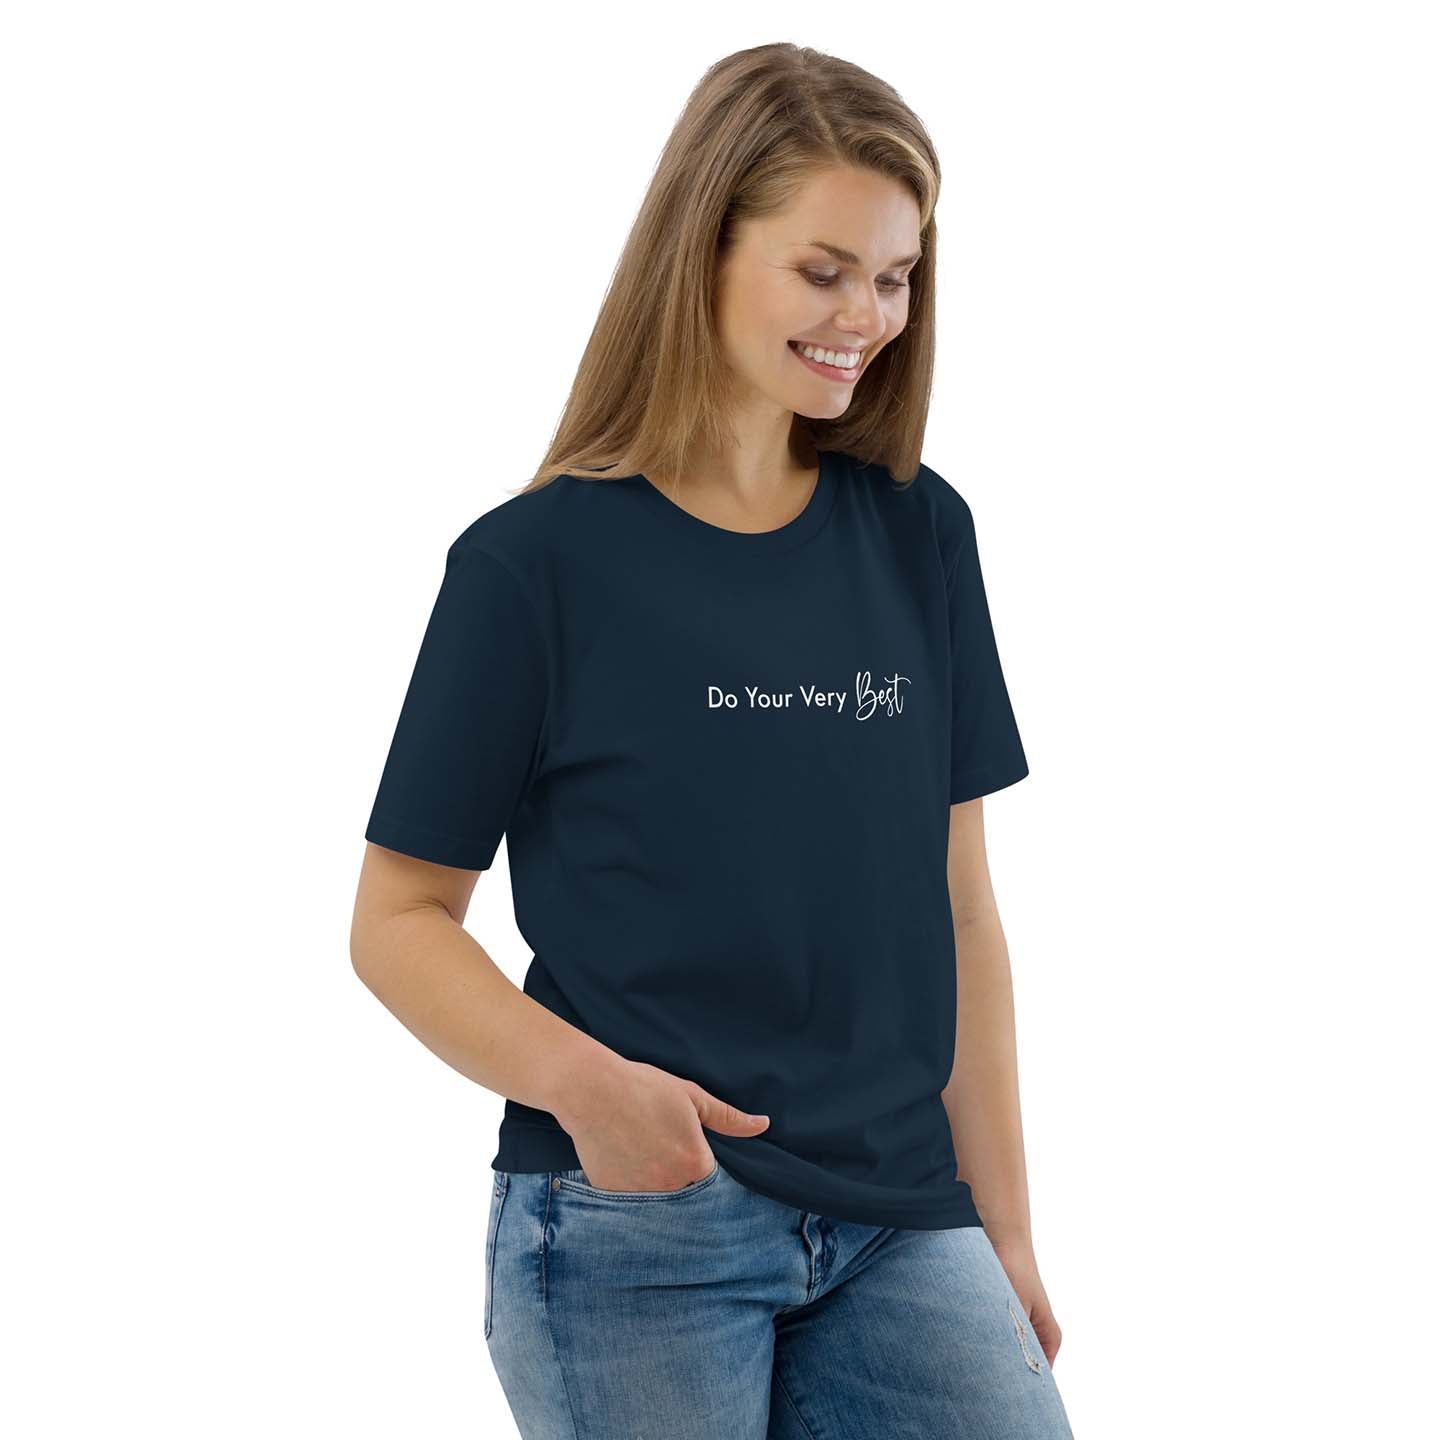 Women navy motivational t-shirt with motivational quote, "Do Your Very Best."